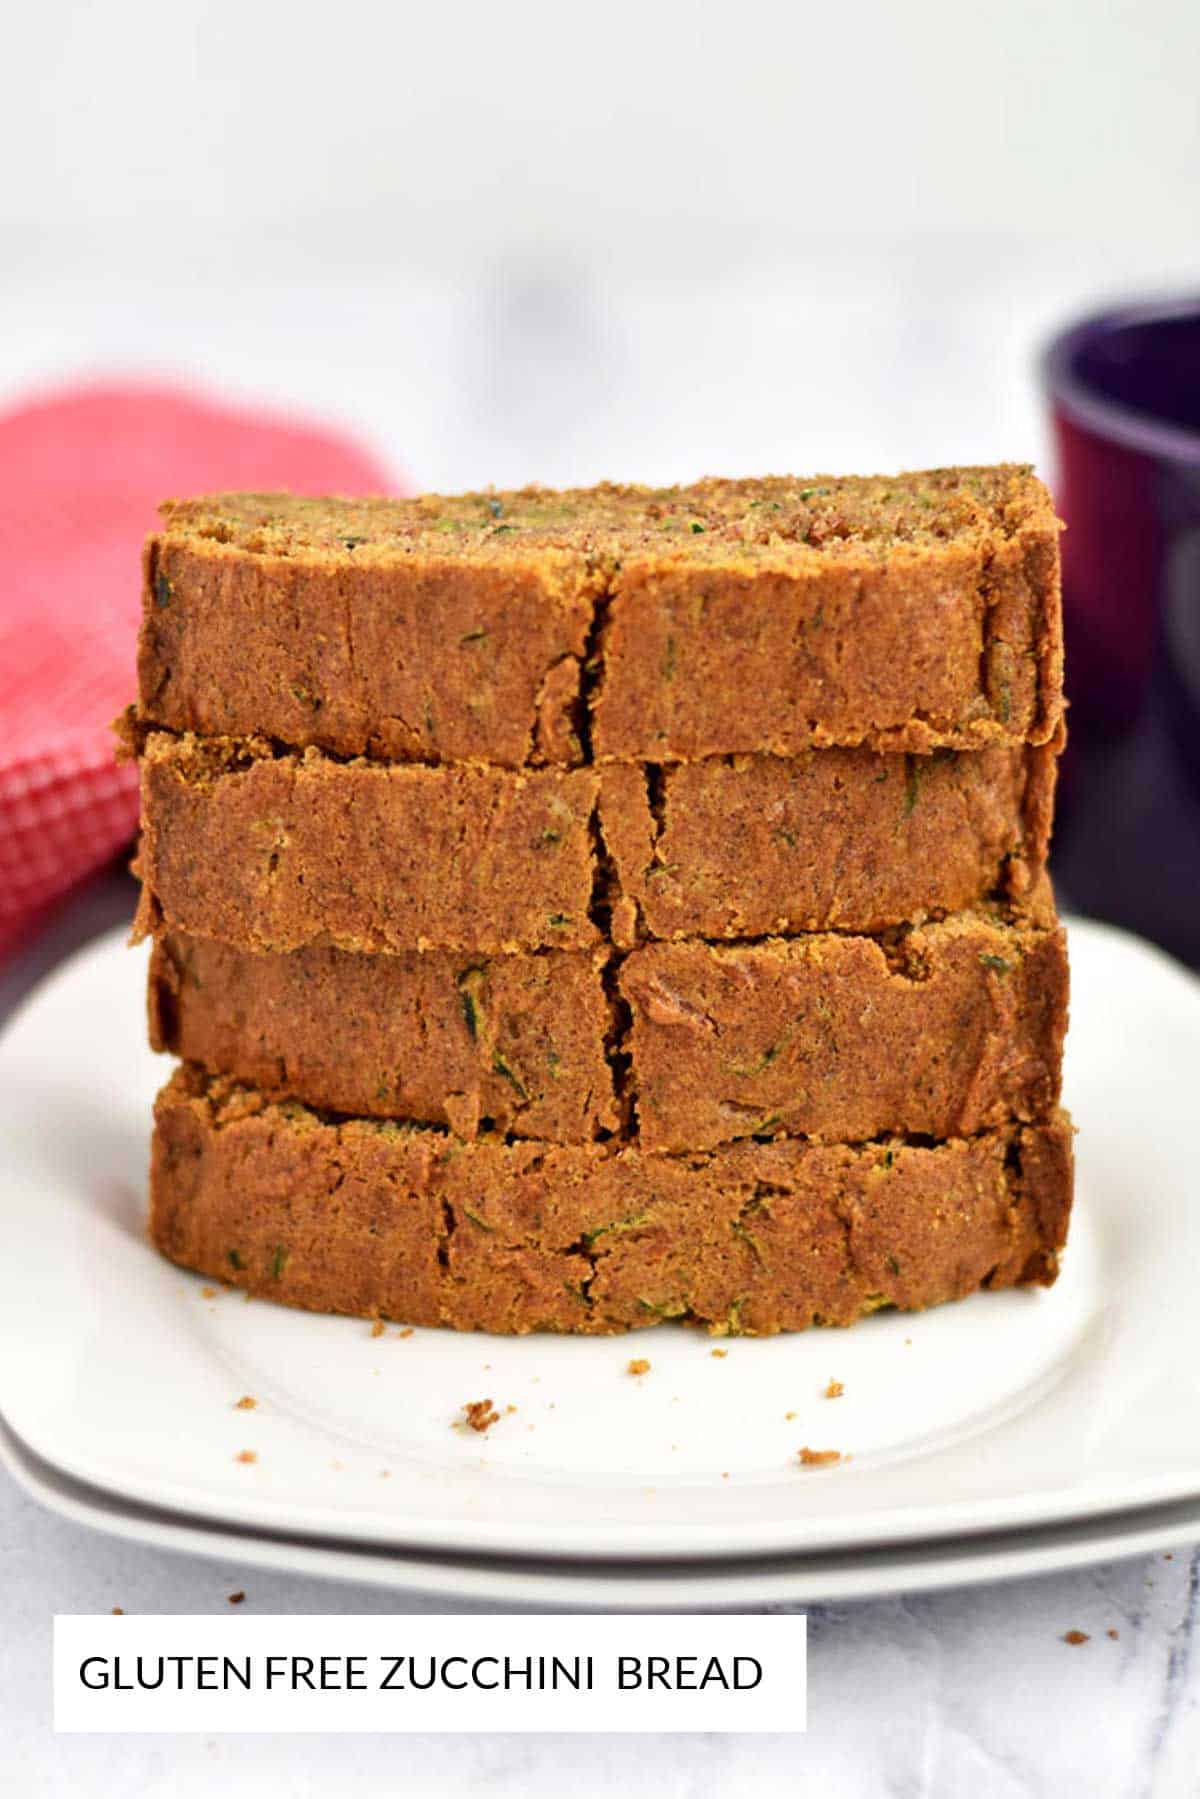 A stack of four slices of gluten free zucchini bread.